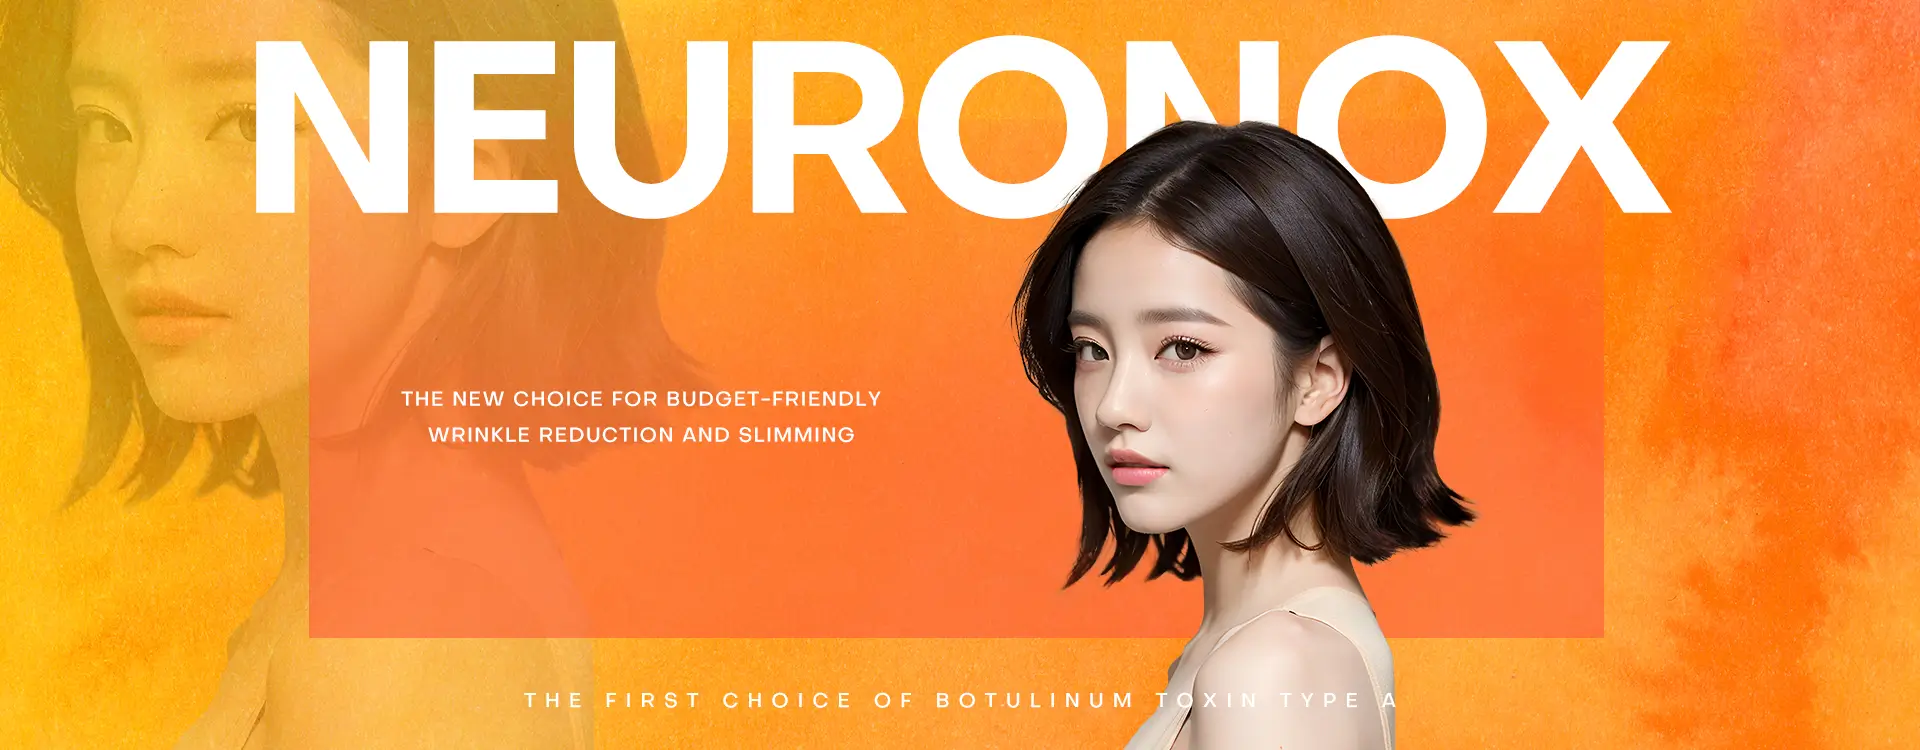 Neuronox - The New Choice for Budget-Friendly Wrinkle Reduction and Slimming